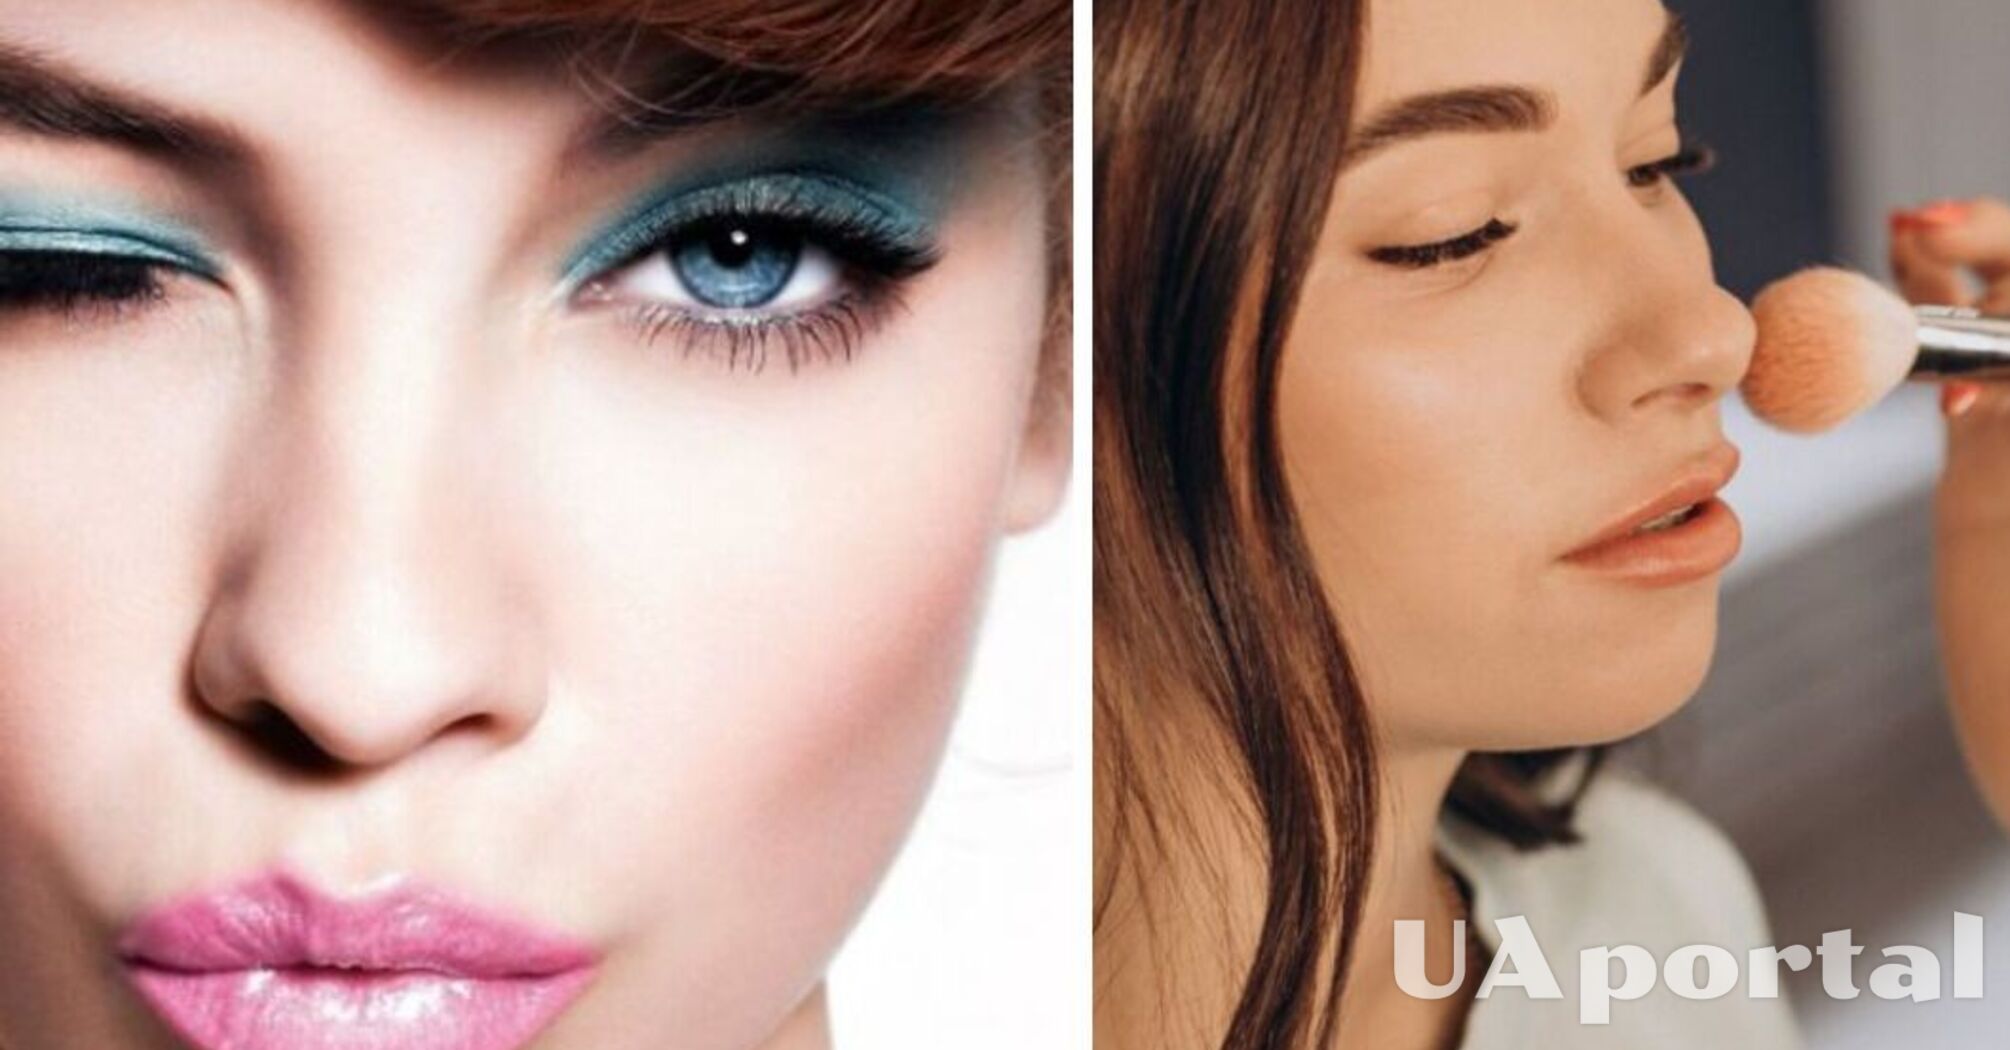 Will stay on all day: secrets of long-lasting makeup